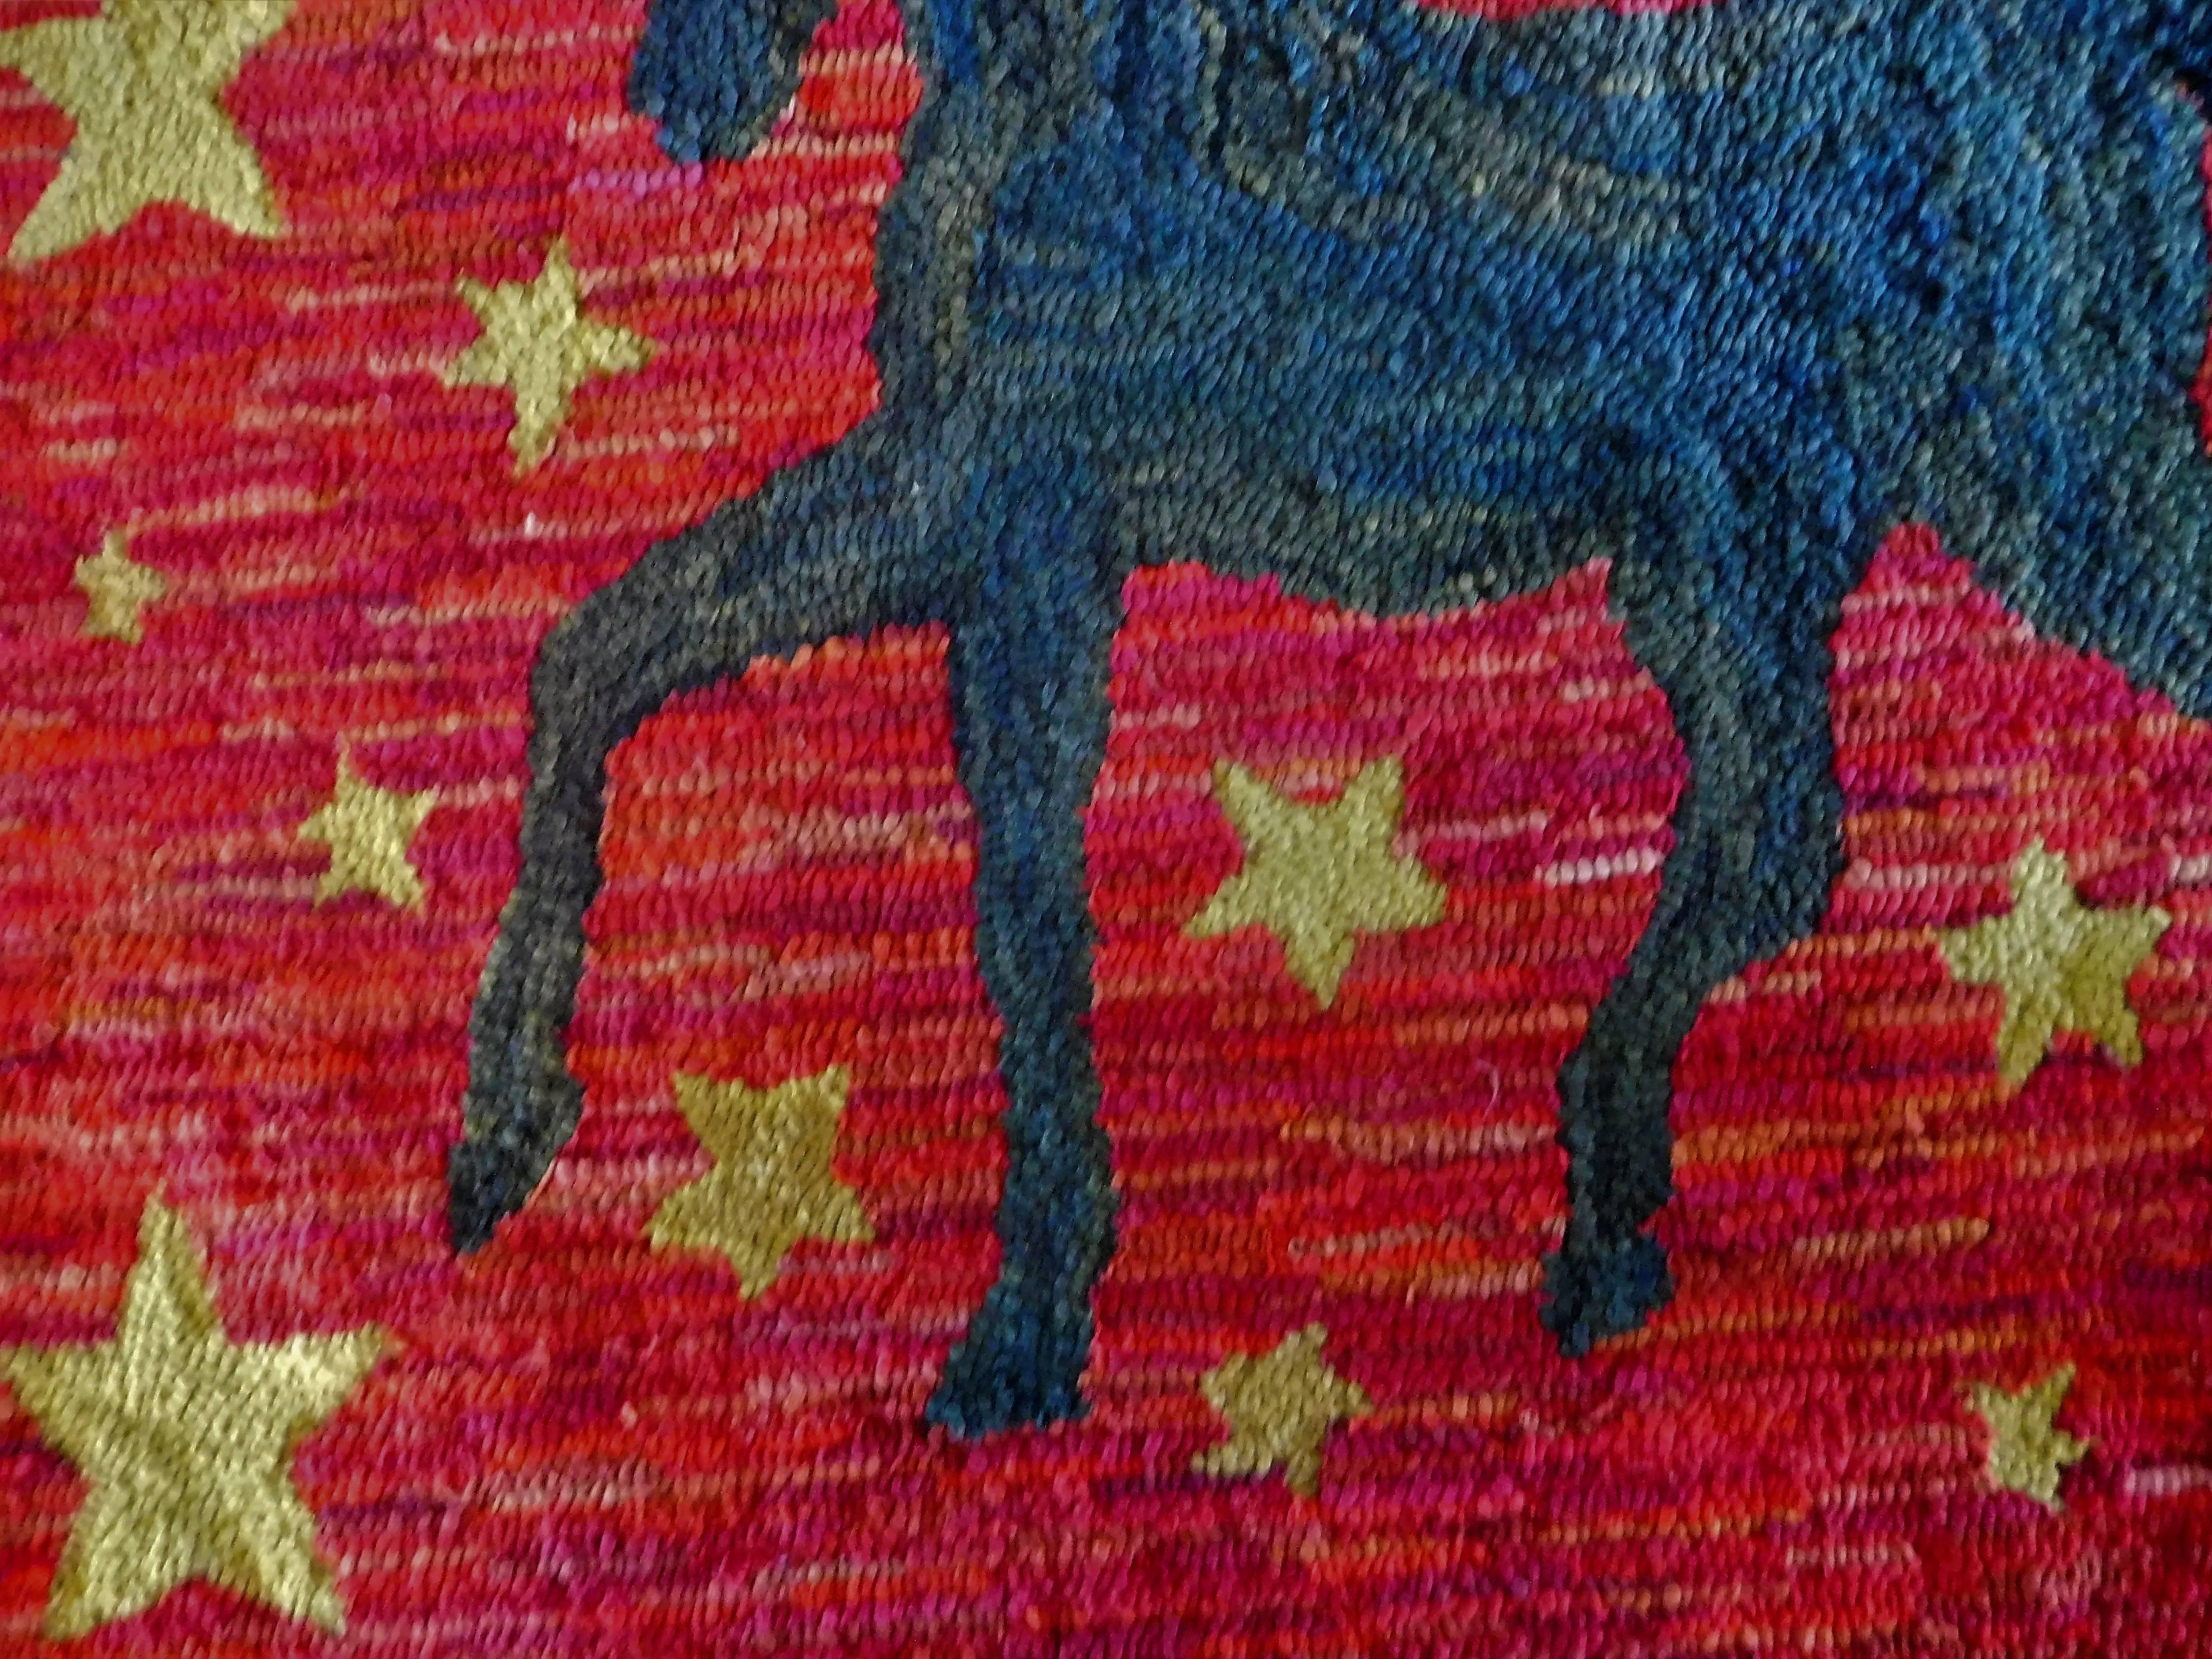 Prancing Morgan Horse on a Hooked Hearth Rug, American Folk Art, 19th Century For Sale 1